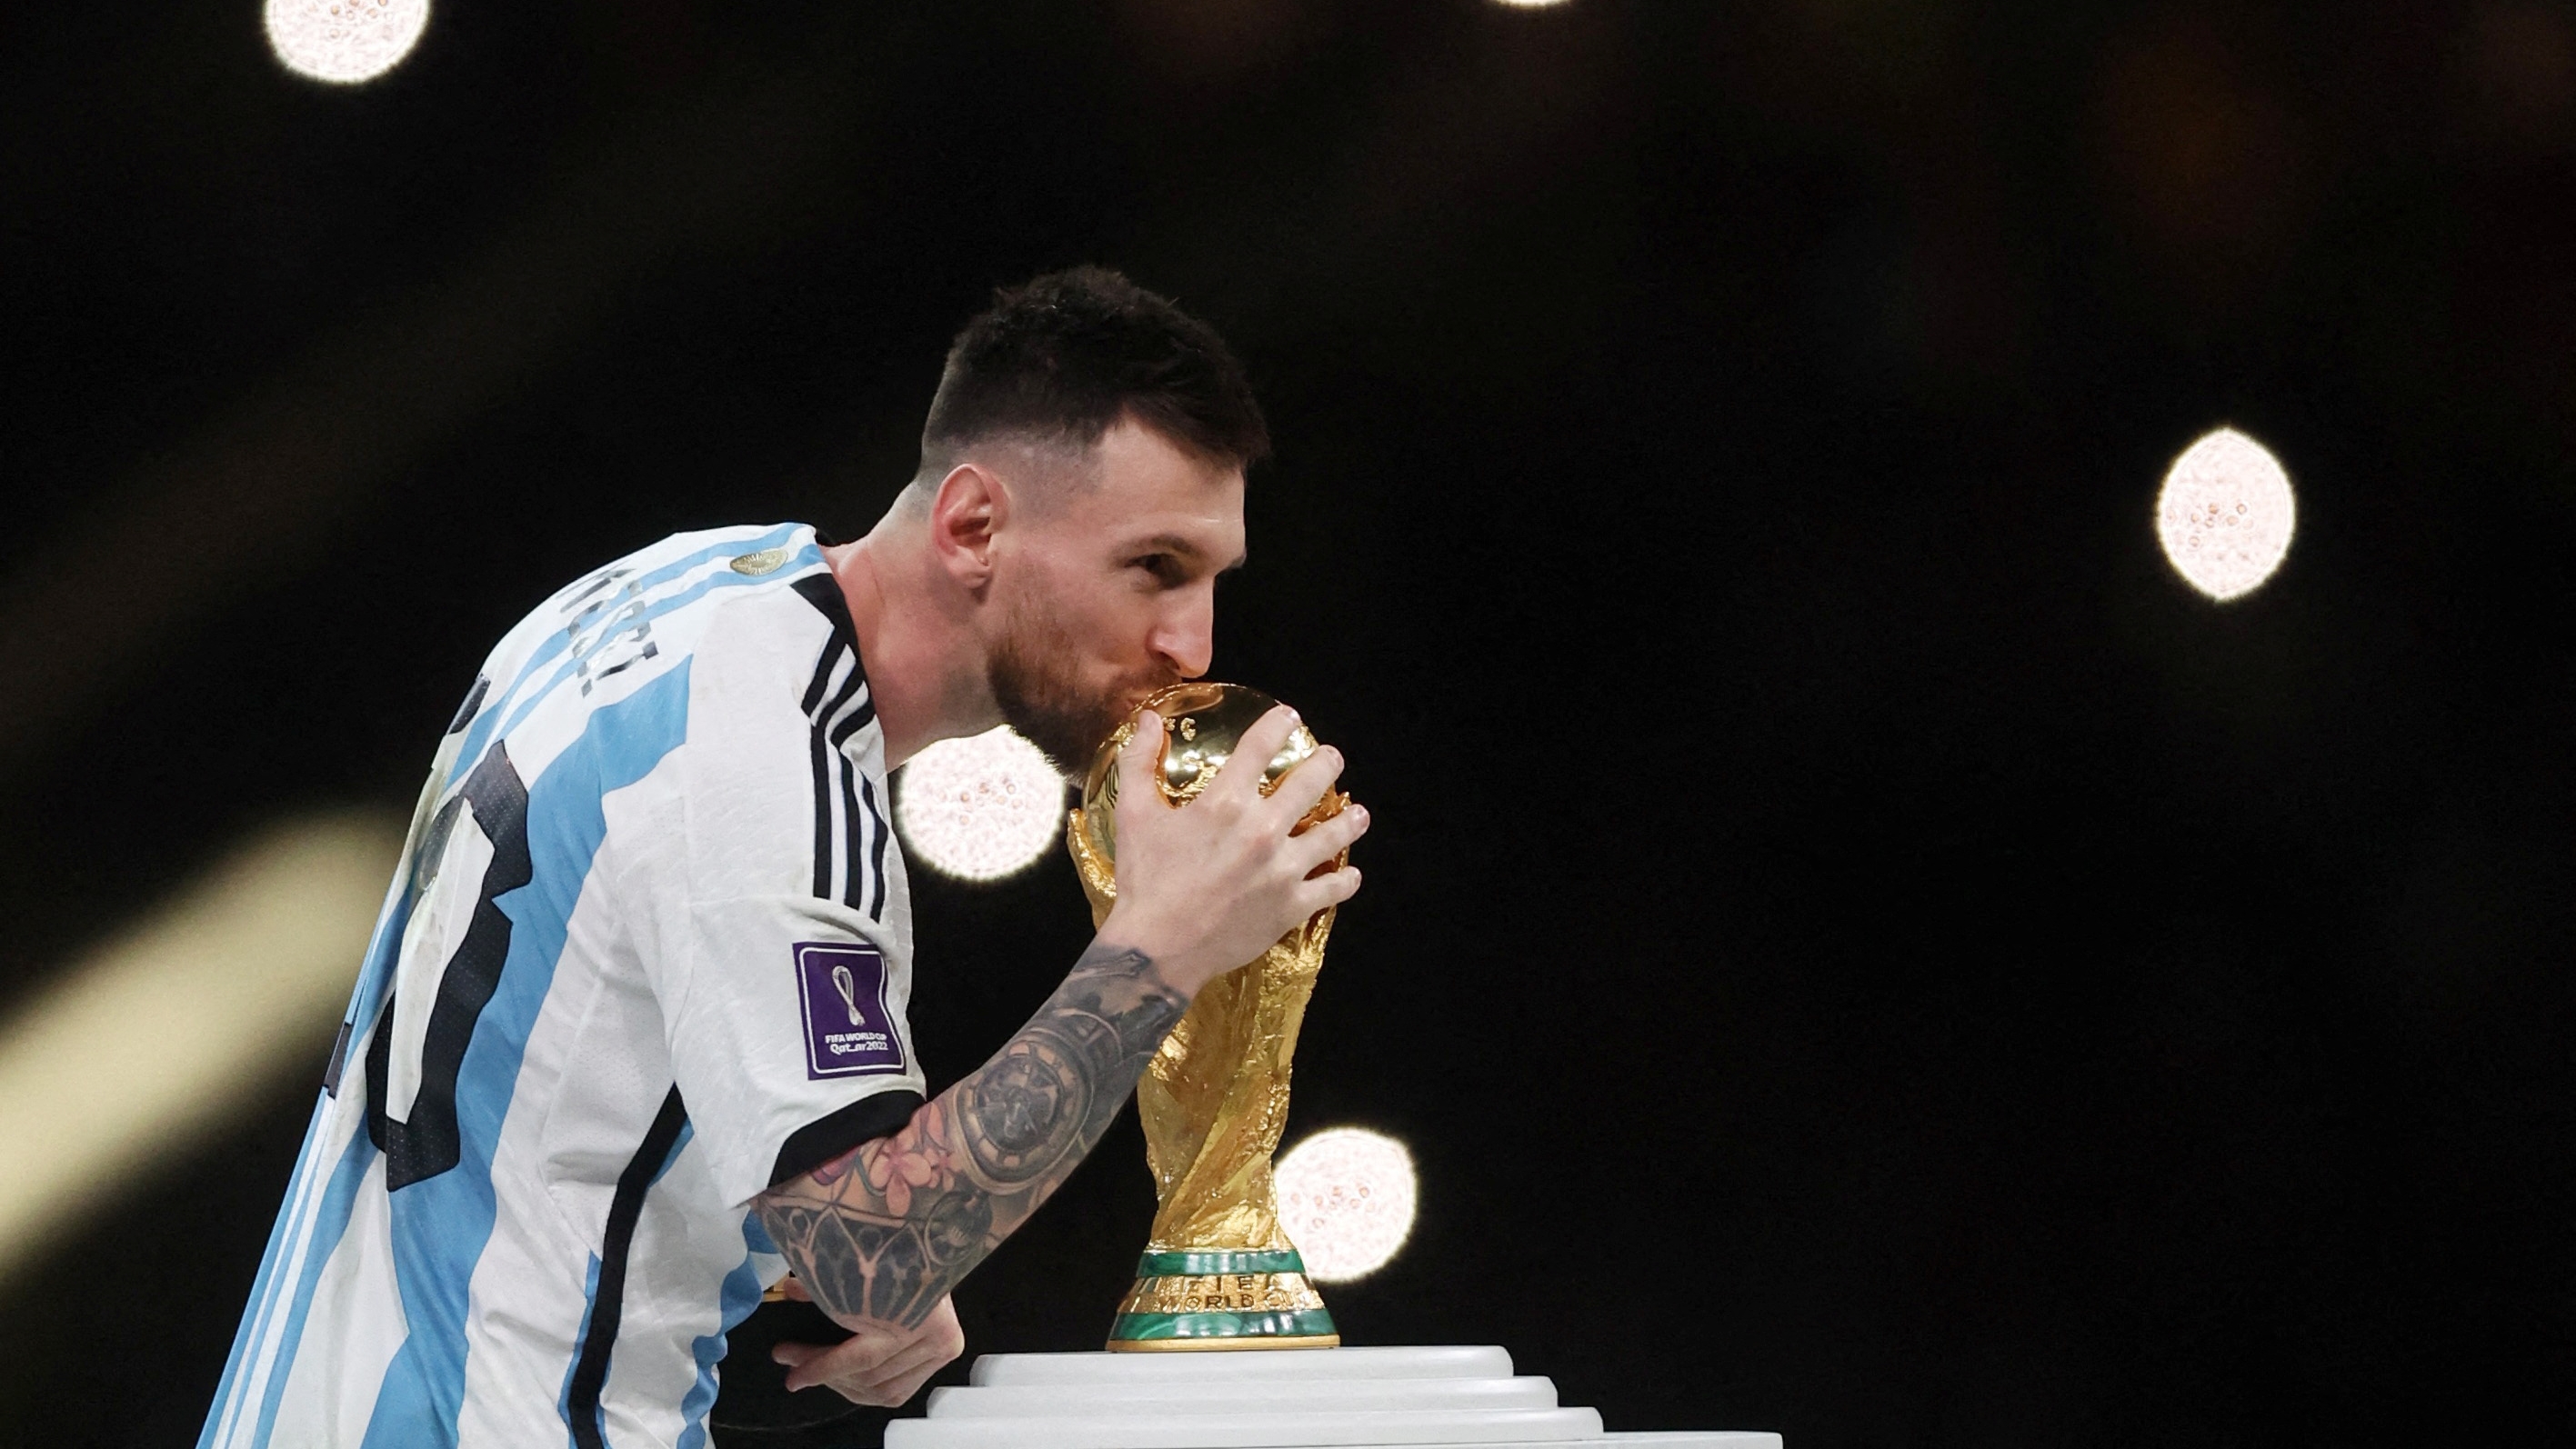 Soccer Football - FIFA World Cup Qatar 2022 - Final - Argentina v France - Lusail Stadium, Lusail, Qatar - December 18, 2022 Argentina's Lionel Messi kisses the World Cup trophy during the trophy ceremony REUTERS/Lee Smith     TPX IMAGES OF THE DAY